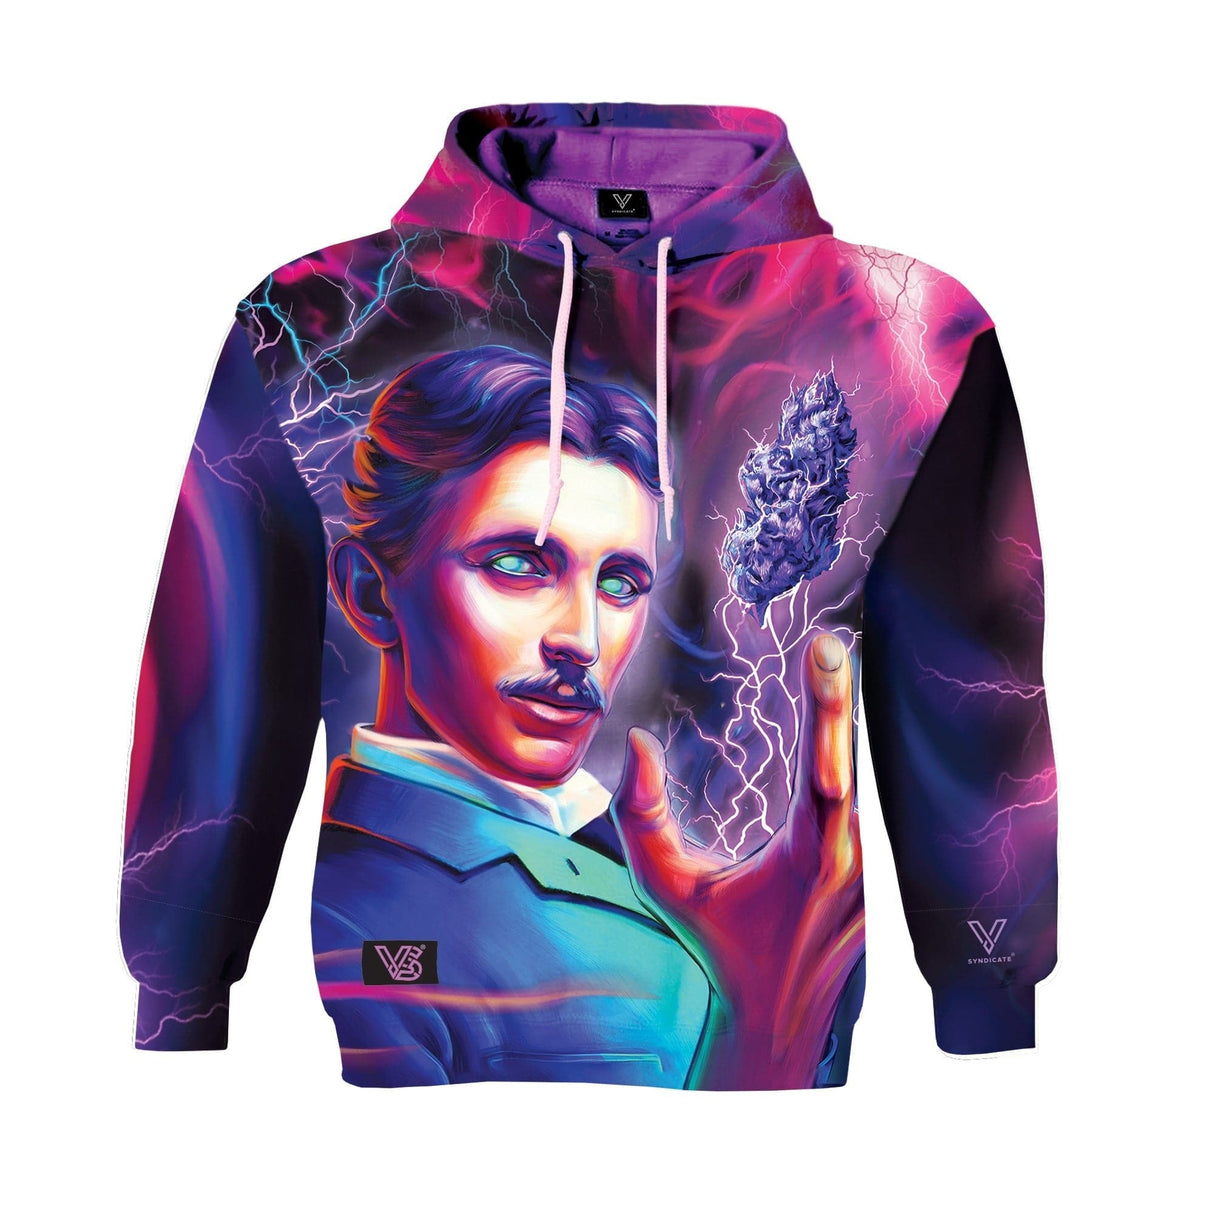 V Syndicate High Voltage Hoodie with vibrant 360° print featuring electrifying artwork, available in sizes S to XXL